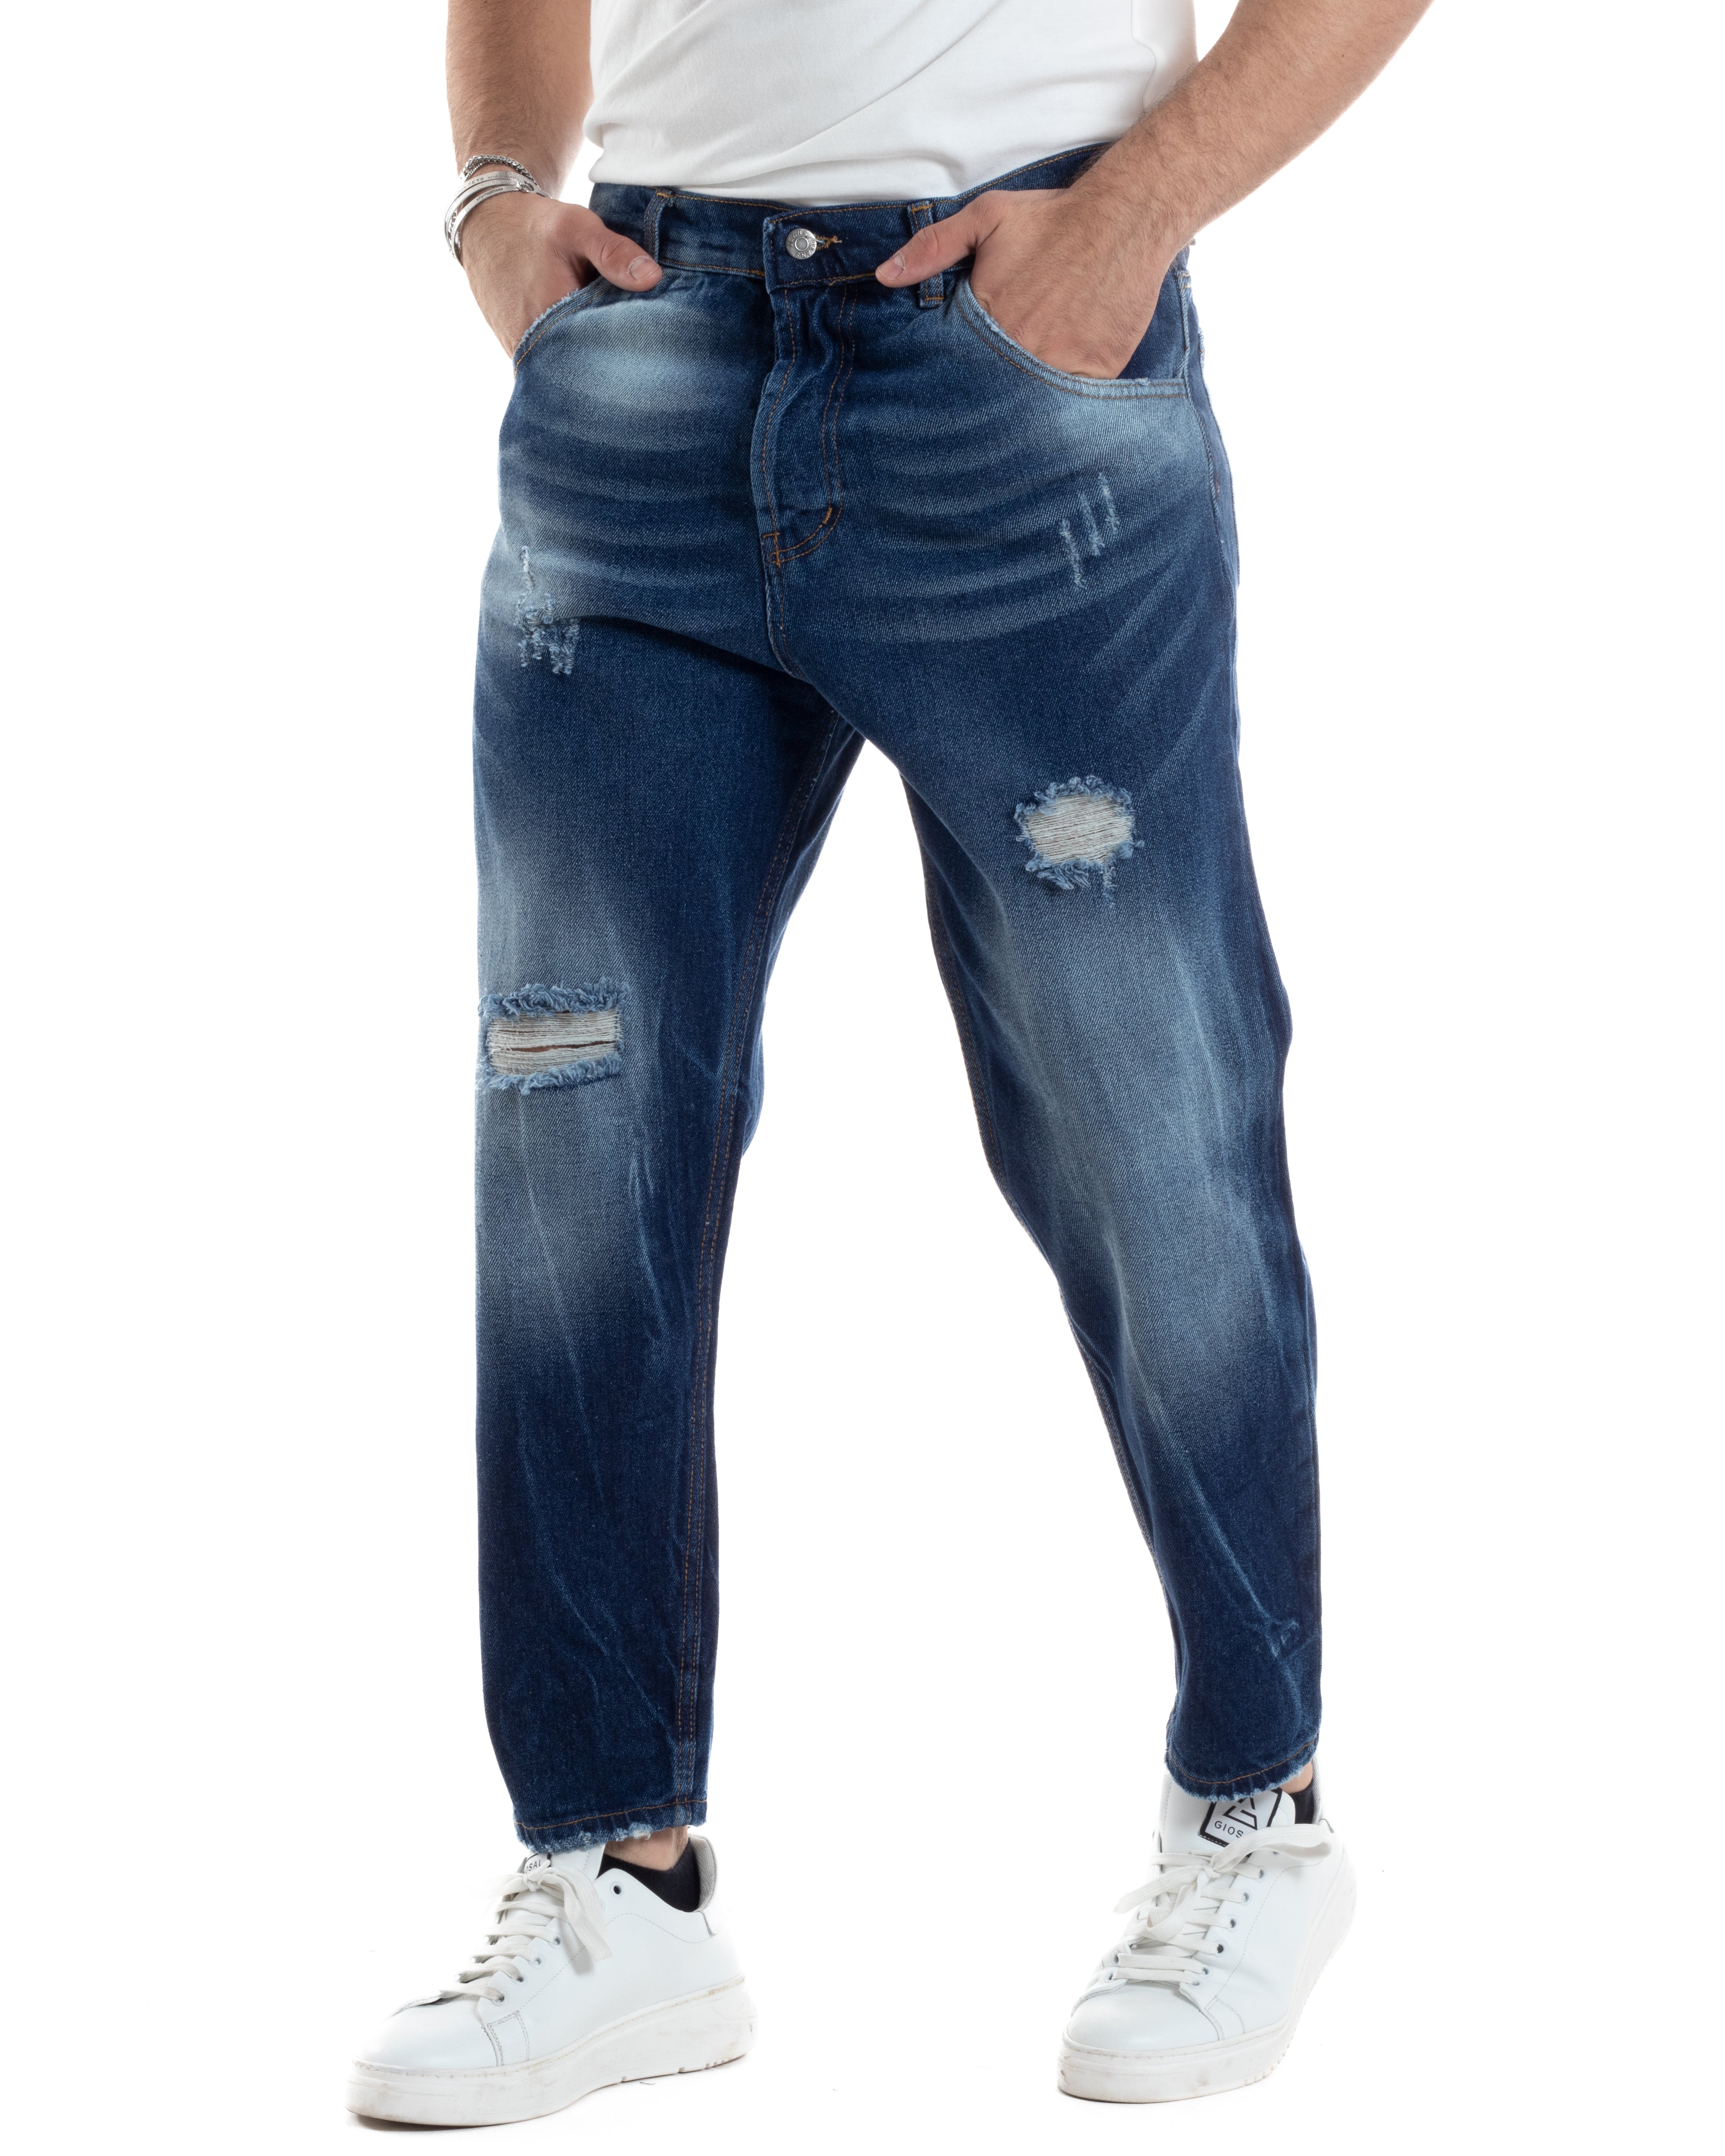 Men's Jeans Trousers Loose Fit Denim With Rips Five Casual Pockets GIOSAL-P5552A